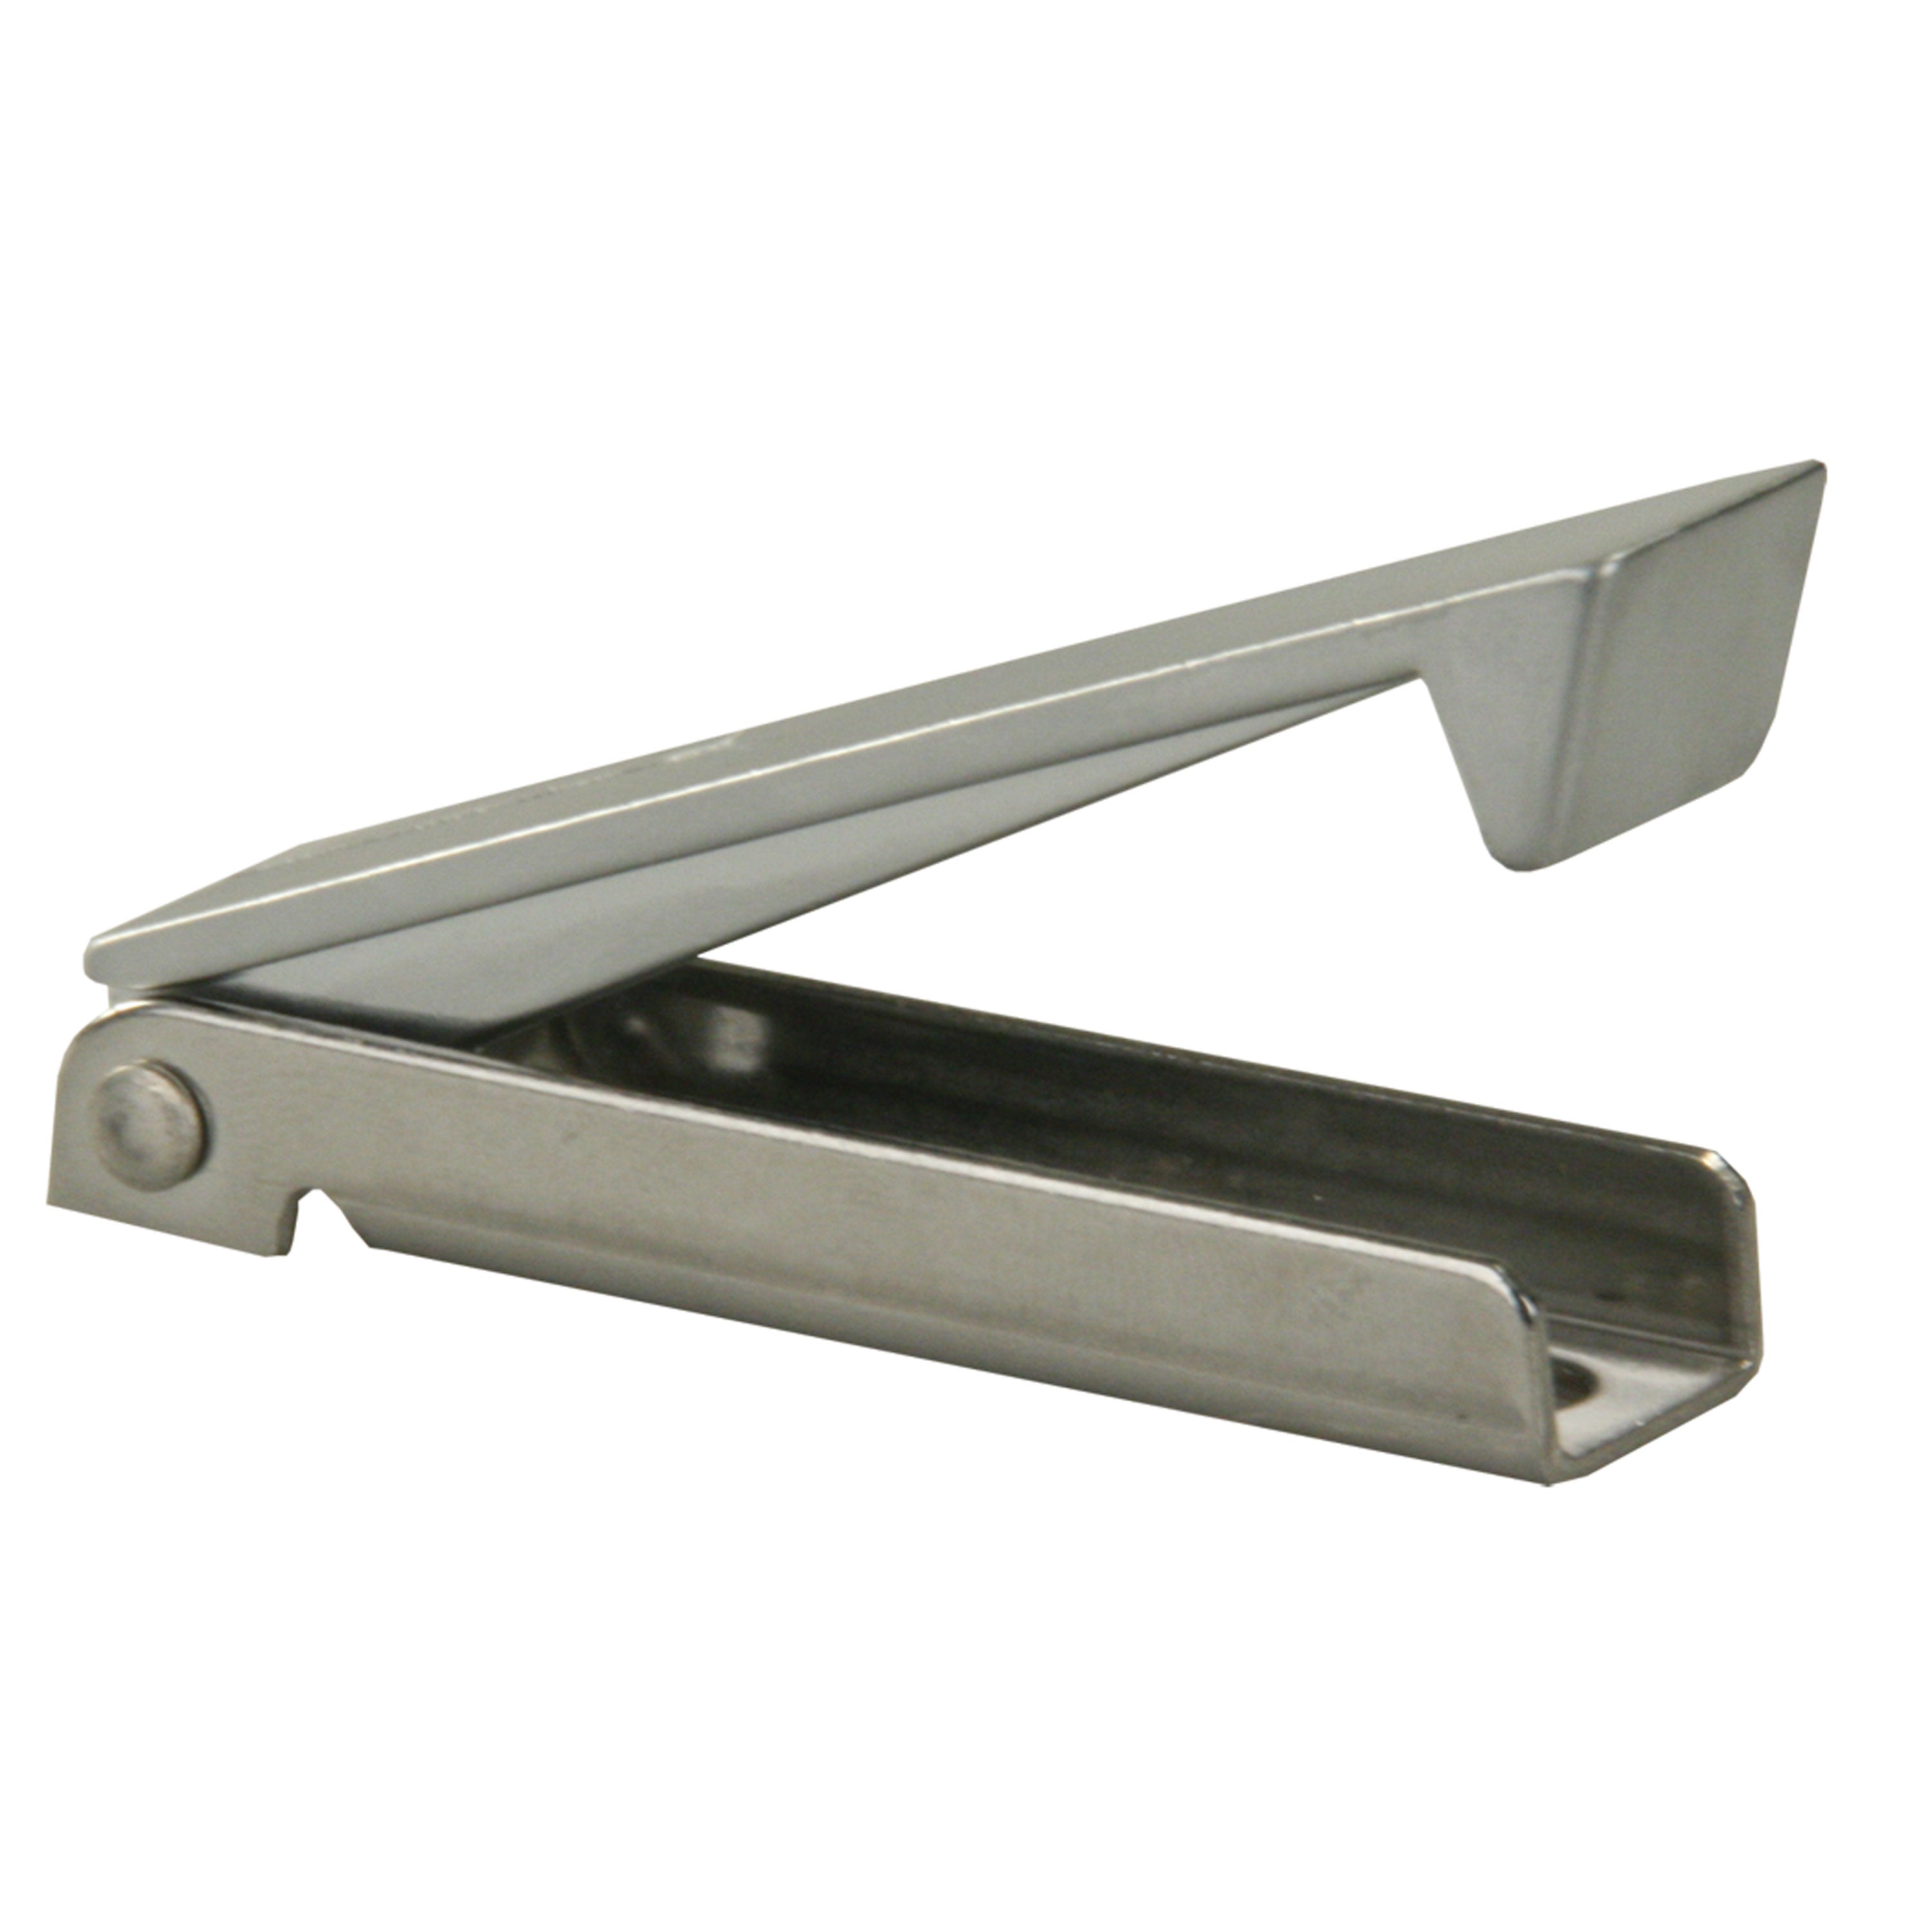 JR Products 10245 Baggage Door Catch - Stainless Steel, Pack of 2